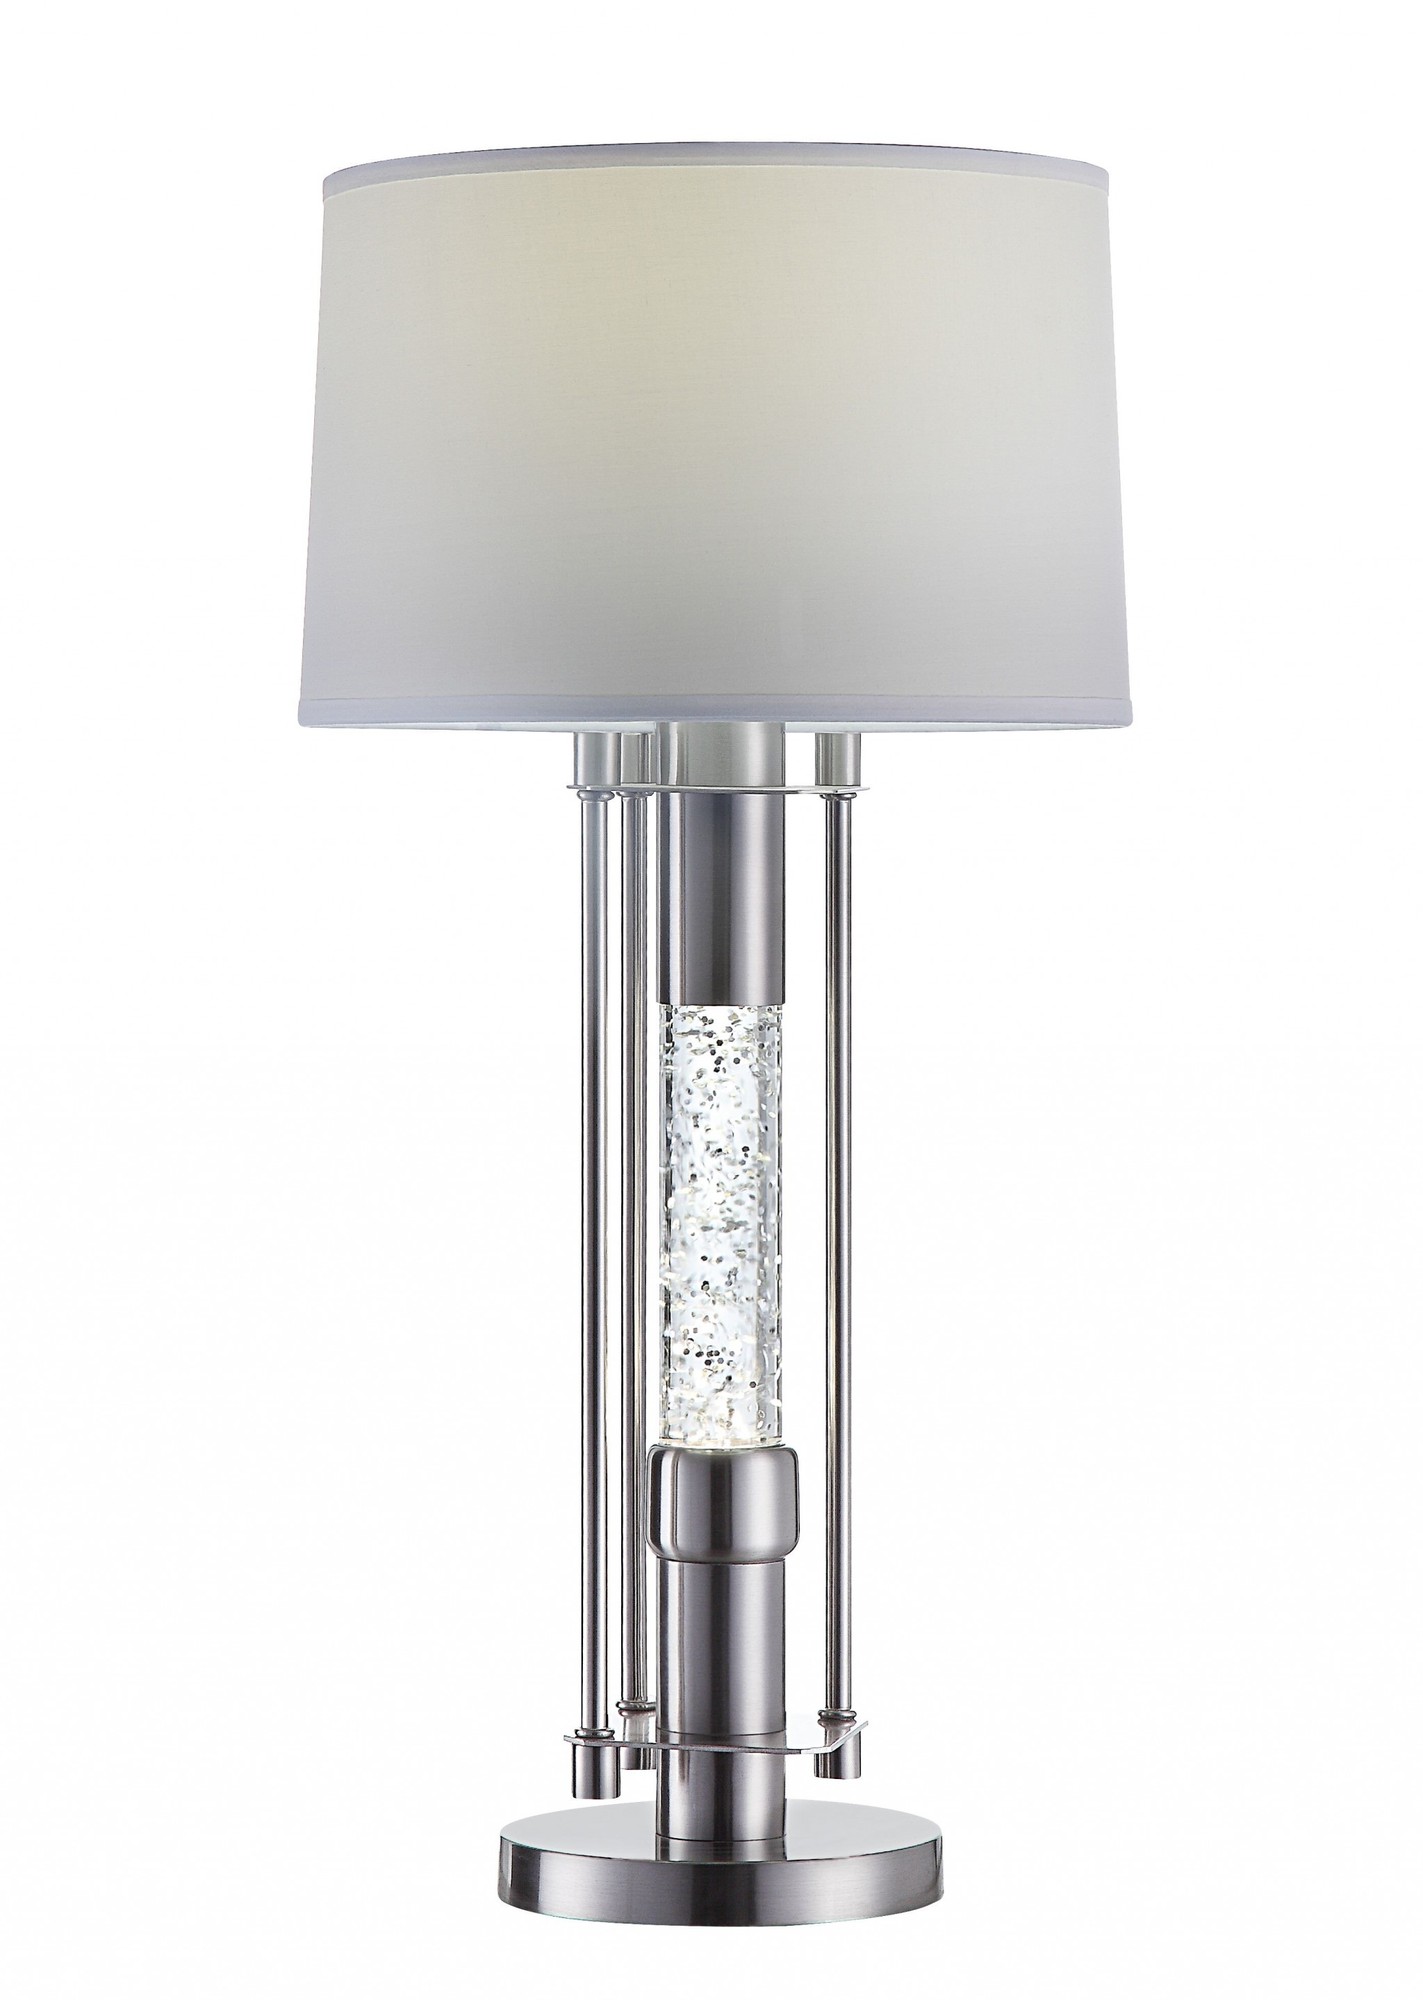 15" X 15" X 32" Brushed Nickel Metal Glass LED Shade Table Lamp